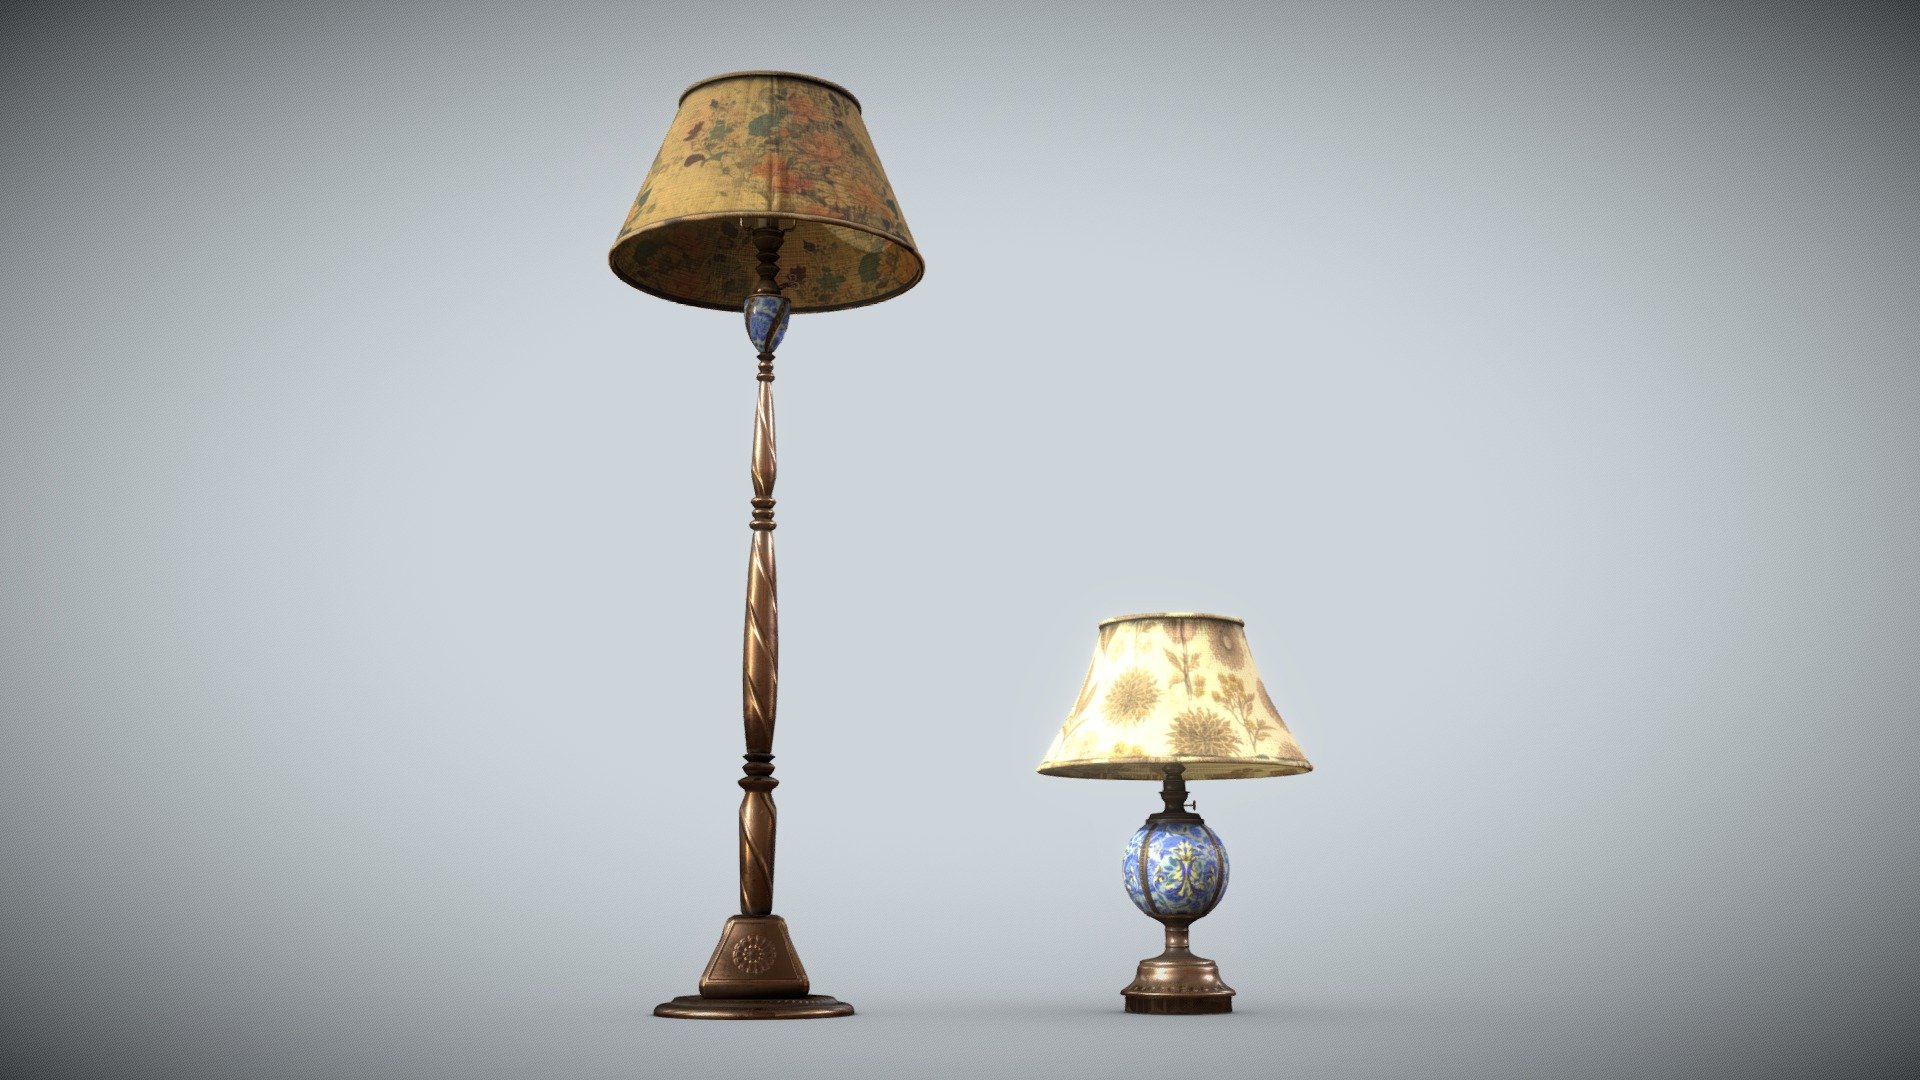 3 x UV channels (has uv lightmap)

No overlaying UV islands

1 x 4K Atlas Texture, just one material for all

Emission map included in the blend file
 - Vintage lamps - Buy Royalty Free 3D model by Lucas Donderis (@lucas.donderis) 3d model